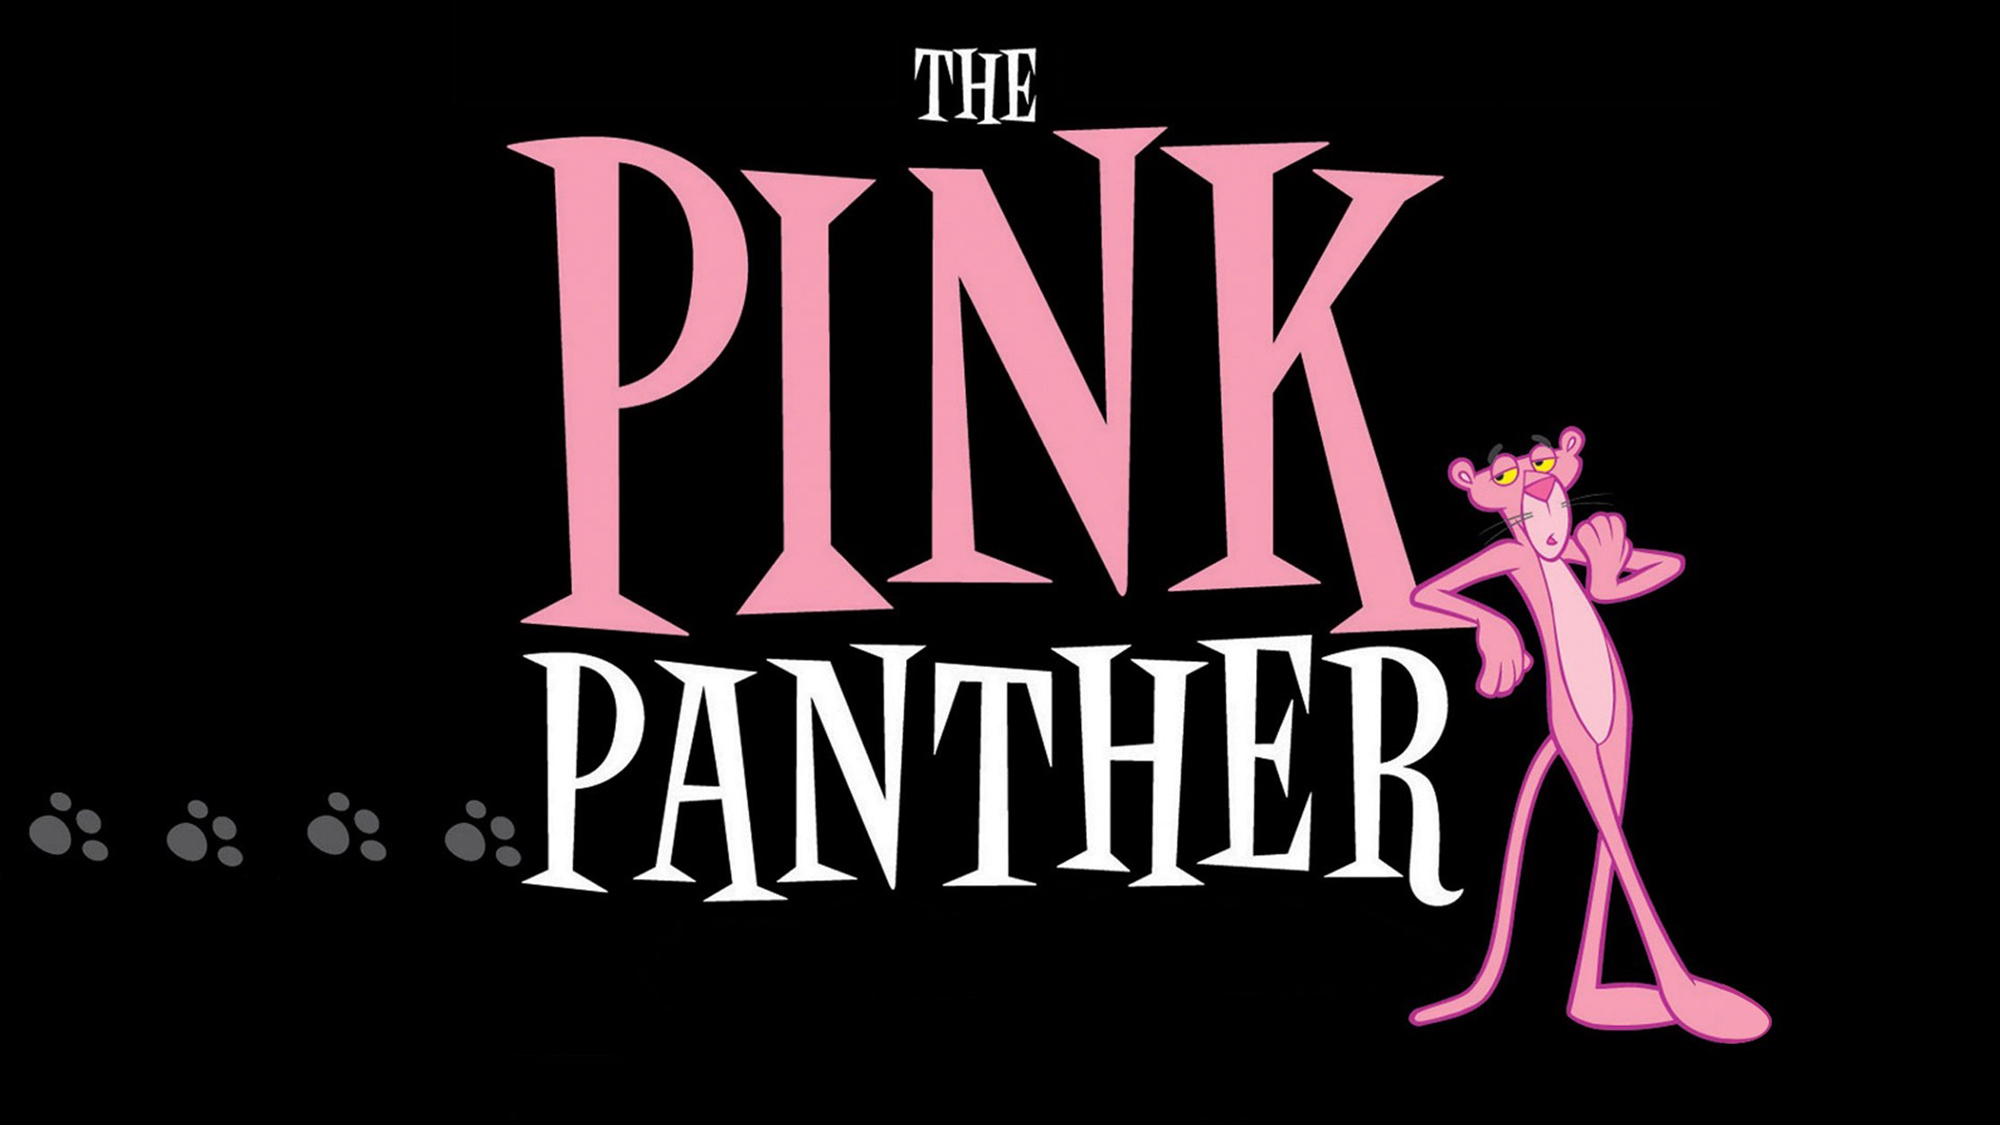 The Pink Panther (2006) Wallpapers. 